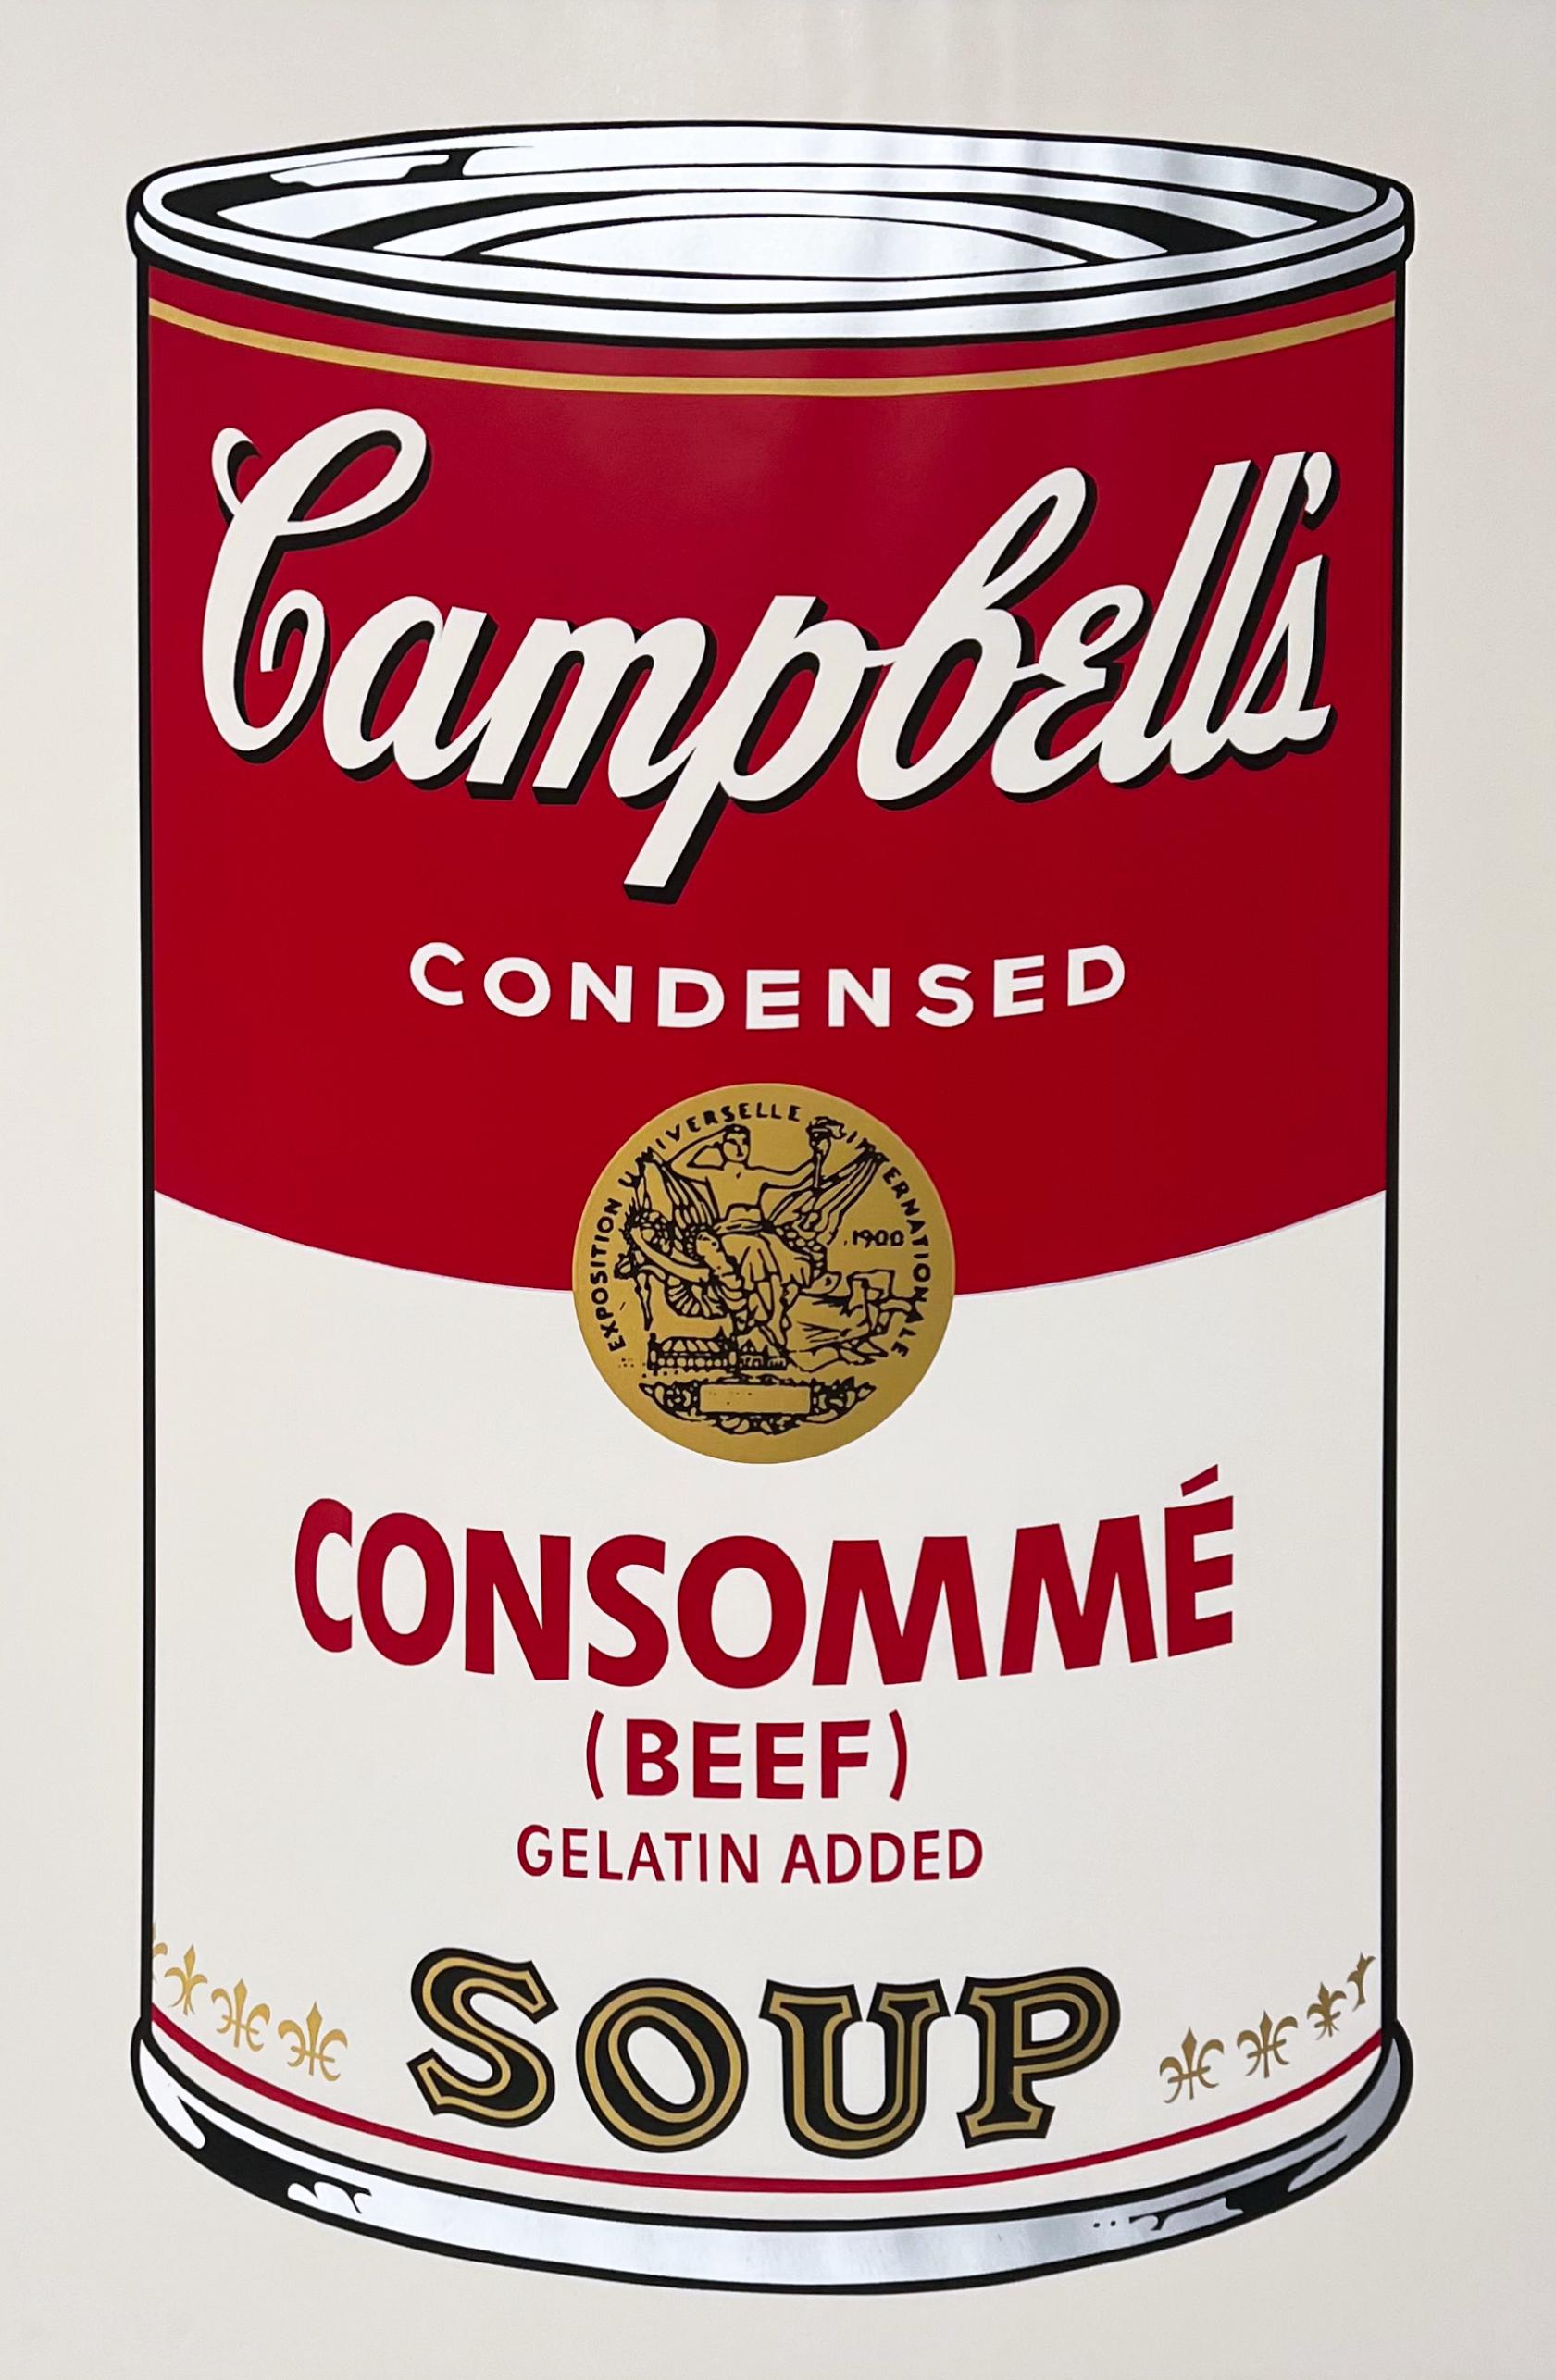 Artist: Andy Warhol
Title: Consomme
Portfolio: 1968 Campbell's Soup I
Medium: Screenprint on paper
Year: 1968
Edition: 198/250
Signed: Yes, in ball-point pen on verso 
Reference: Feldman II.52
Sheet Size: 35" x 23"